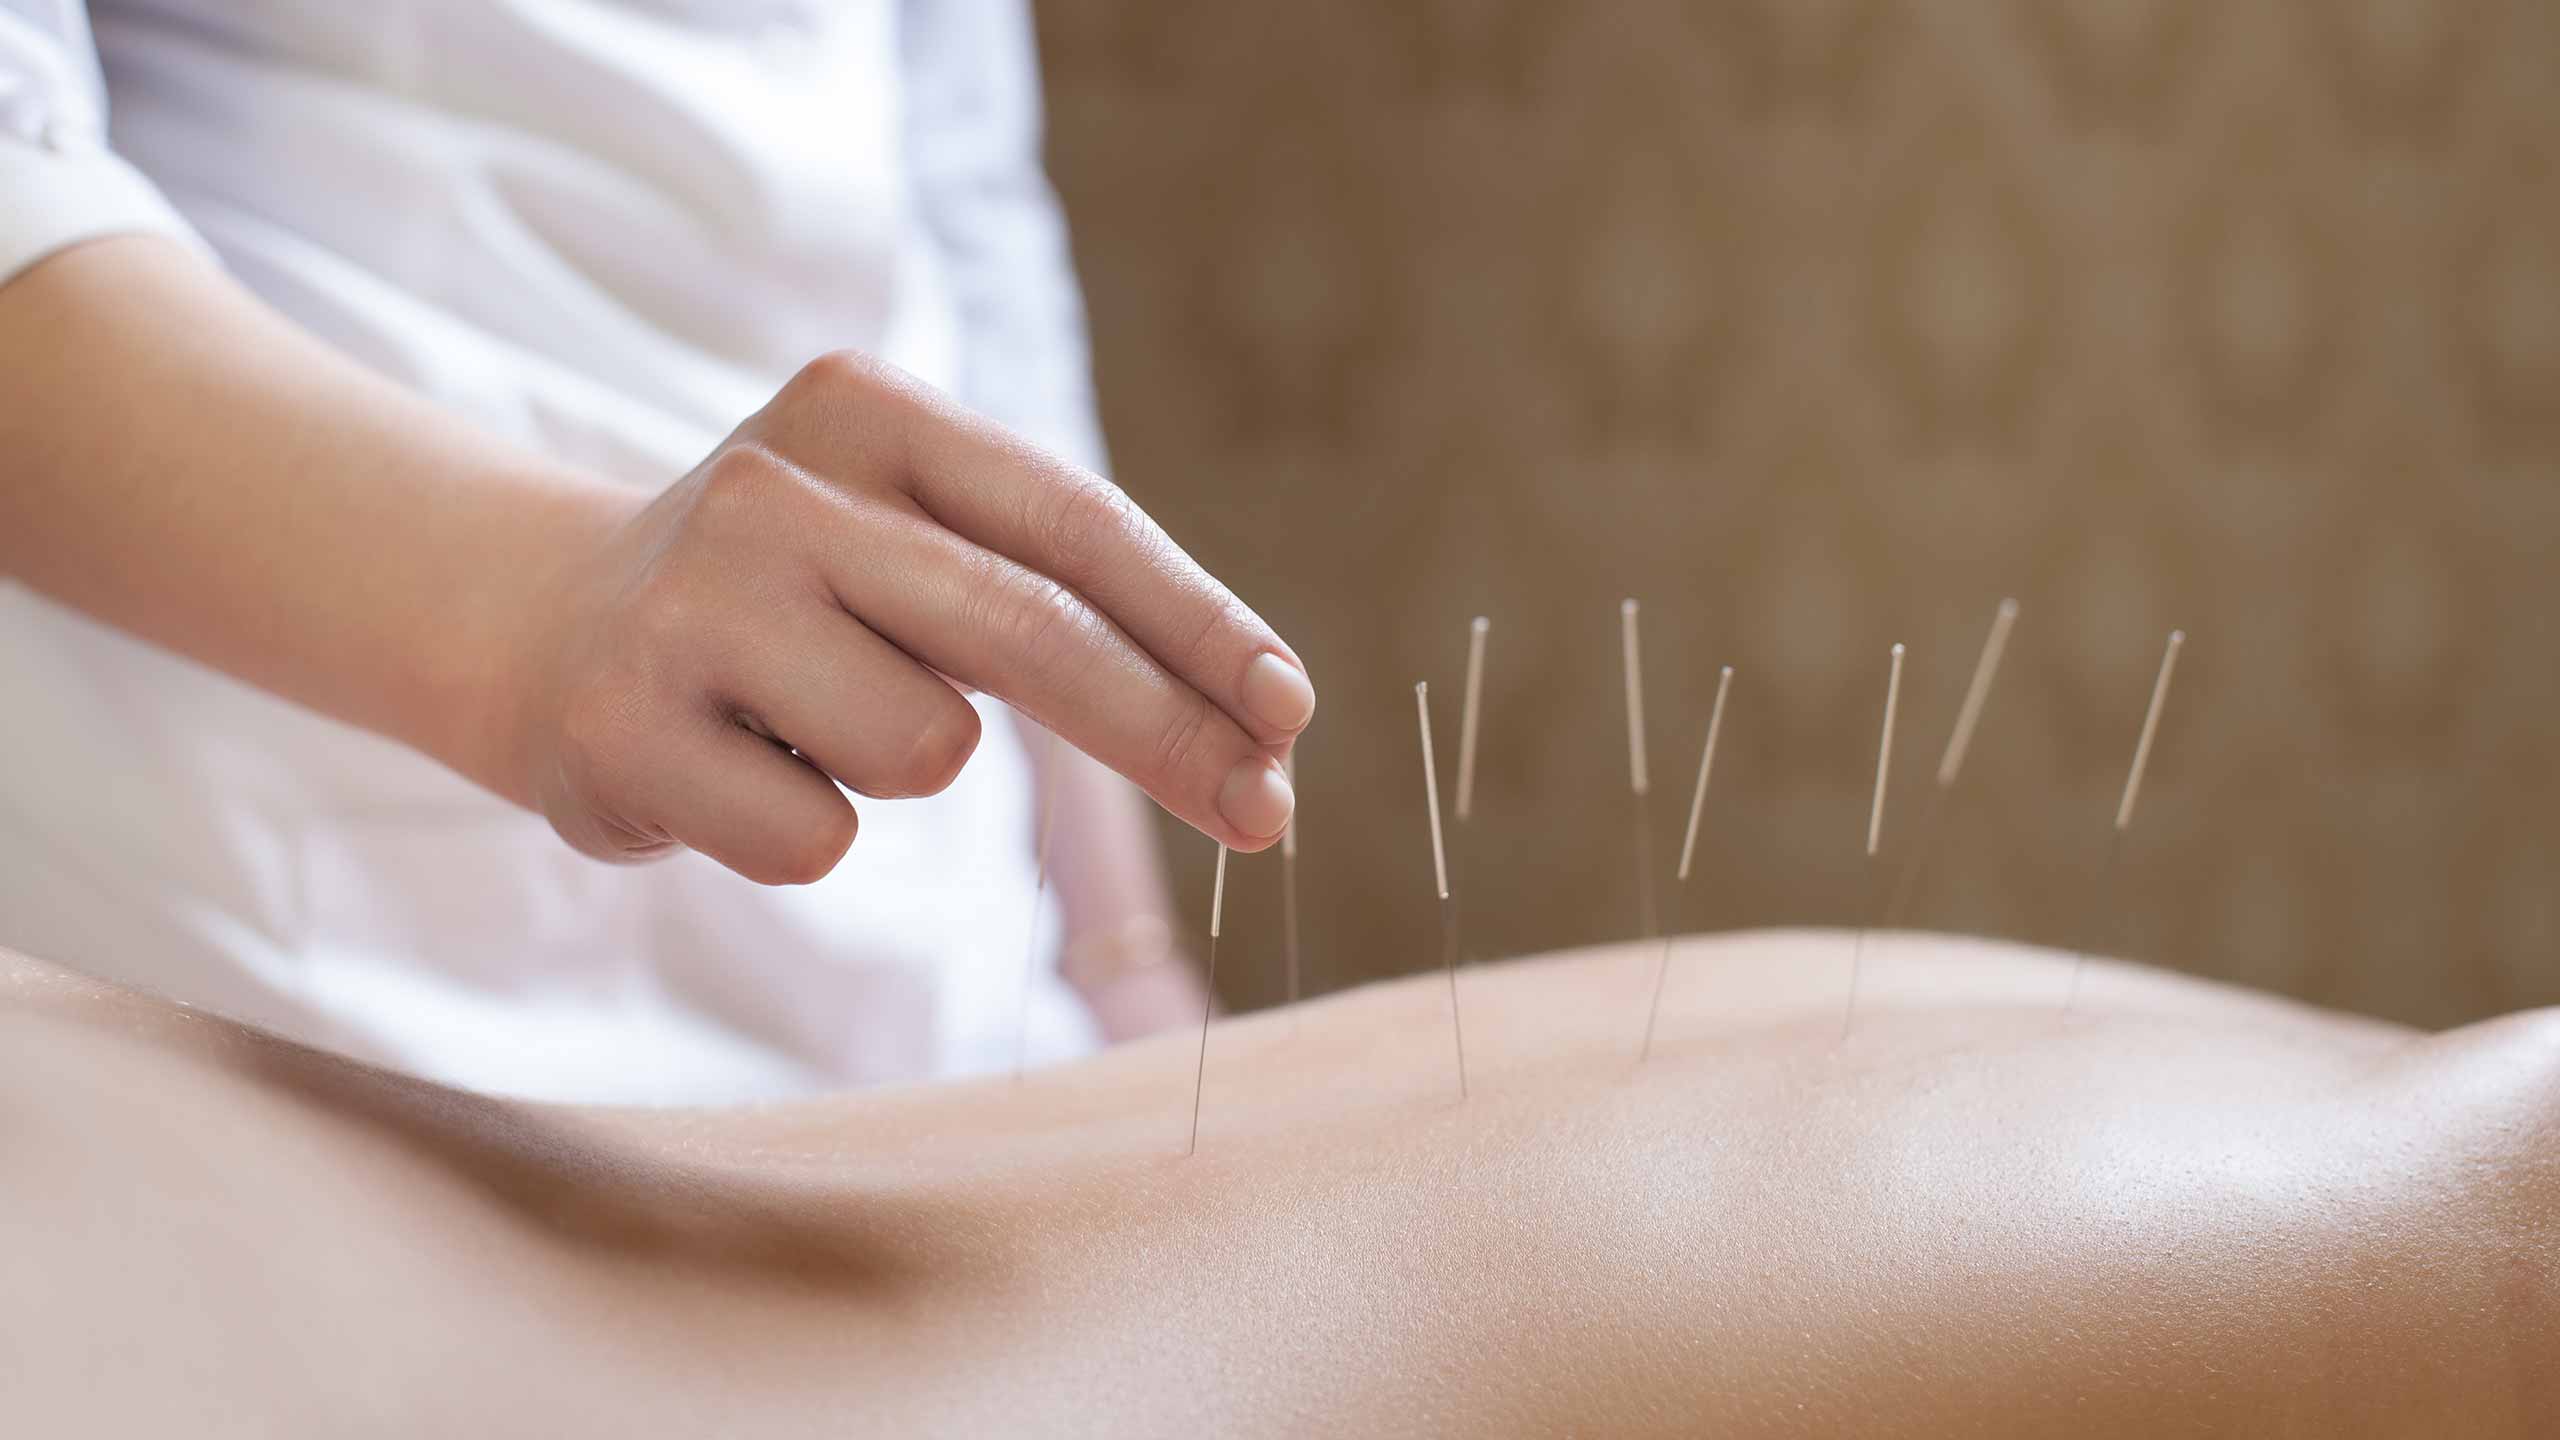 Acupuncturist’s hand  adjusting needles on the back of patient